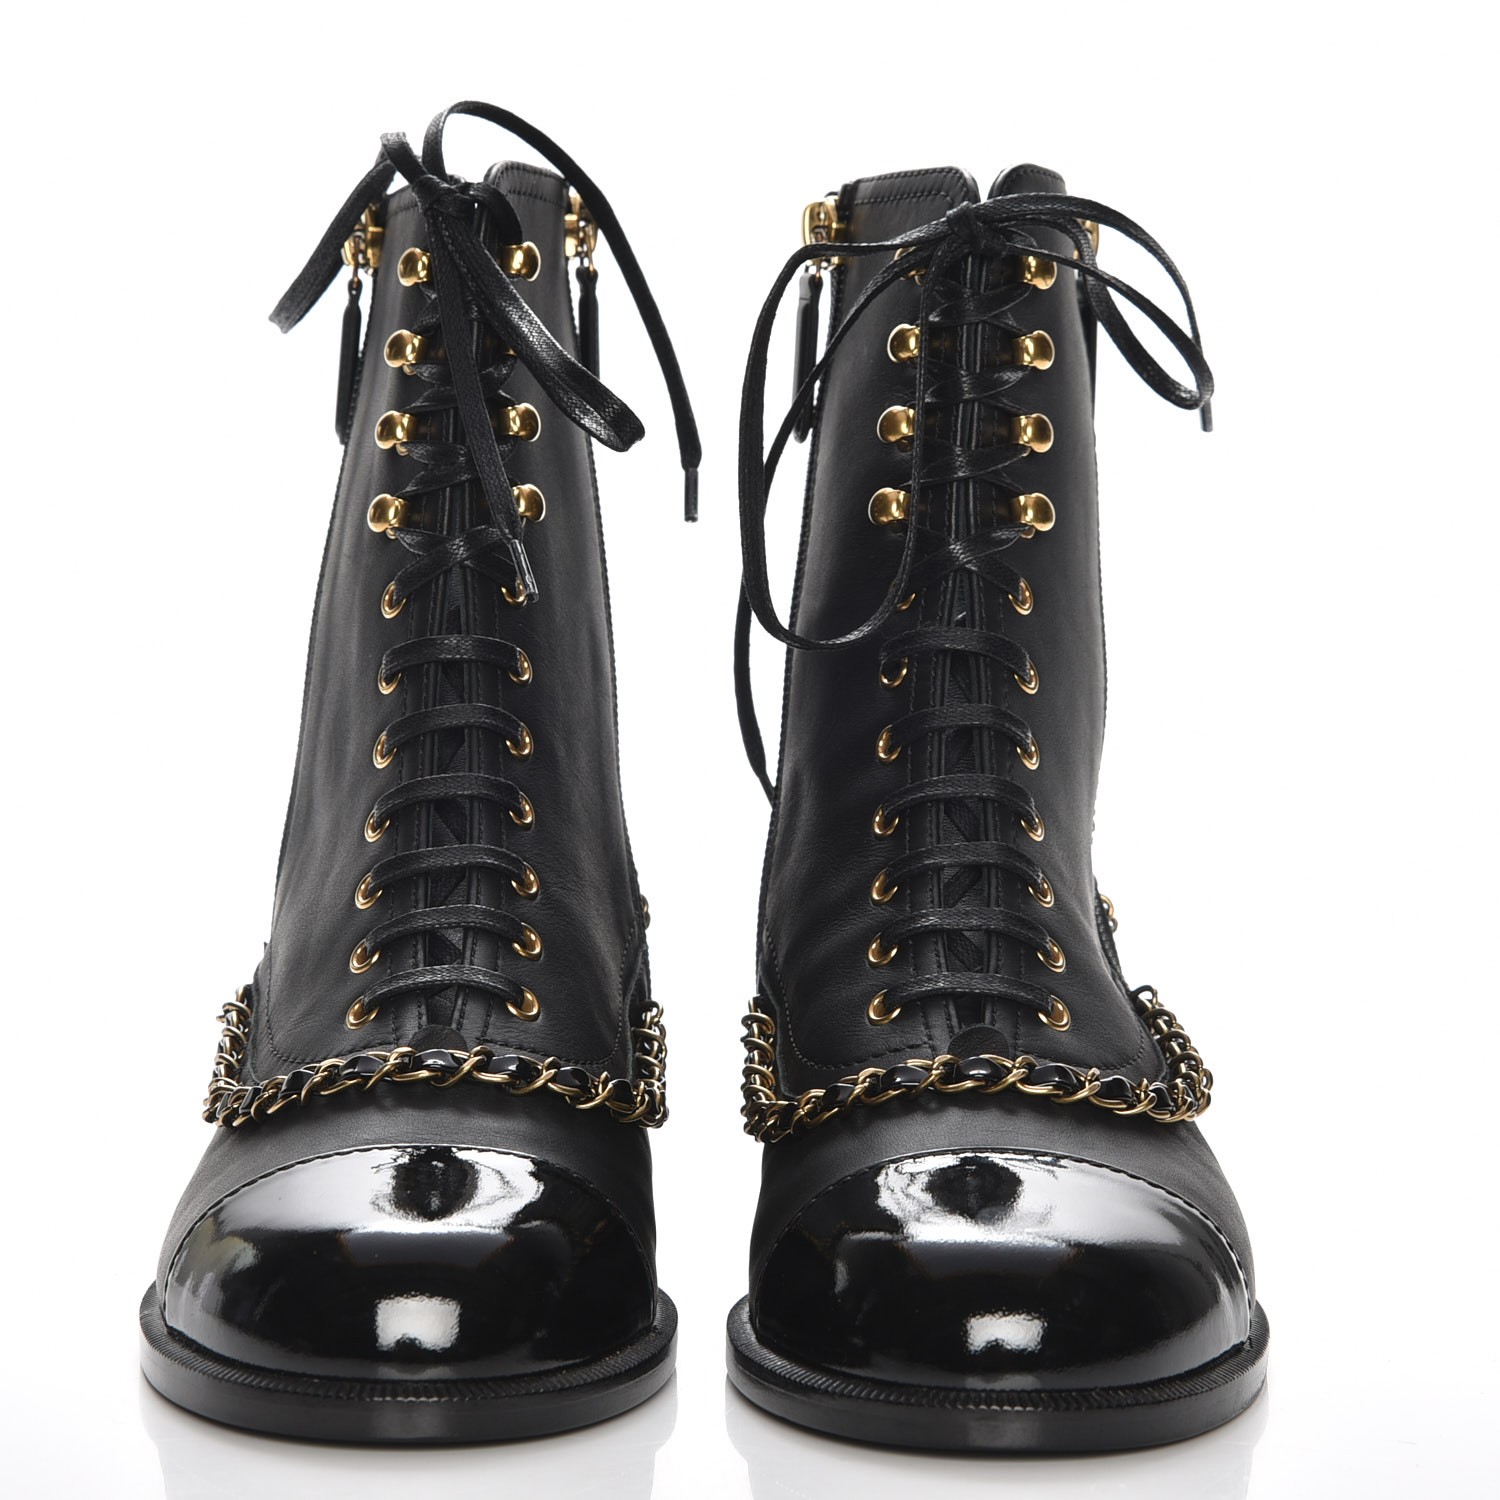 CHANEL Calfskin Chain Lace Up Boots 37.5 Black 212415 | FASHIONPHILE